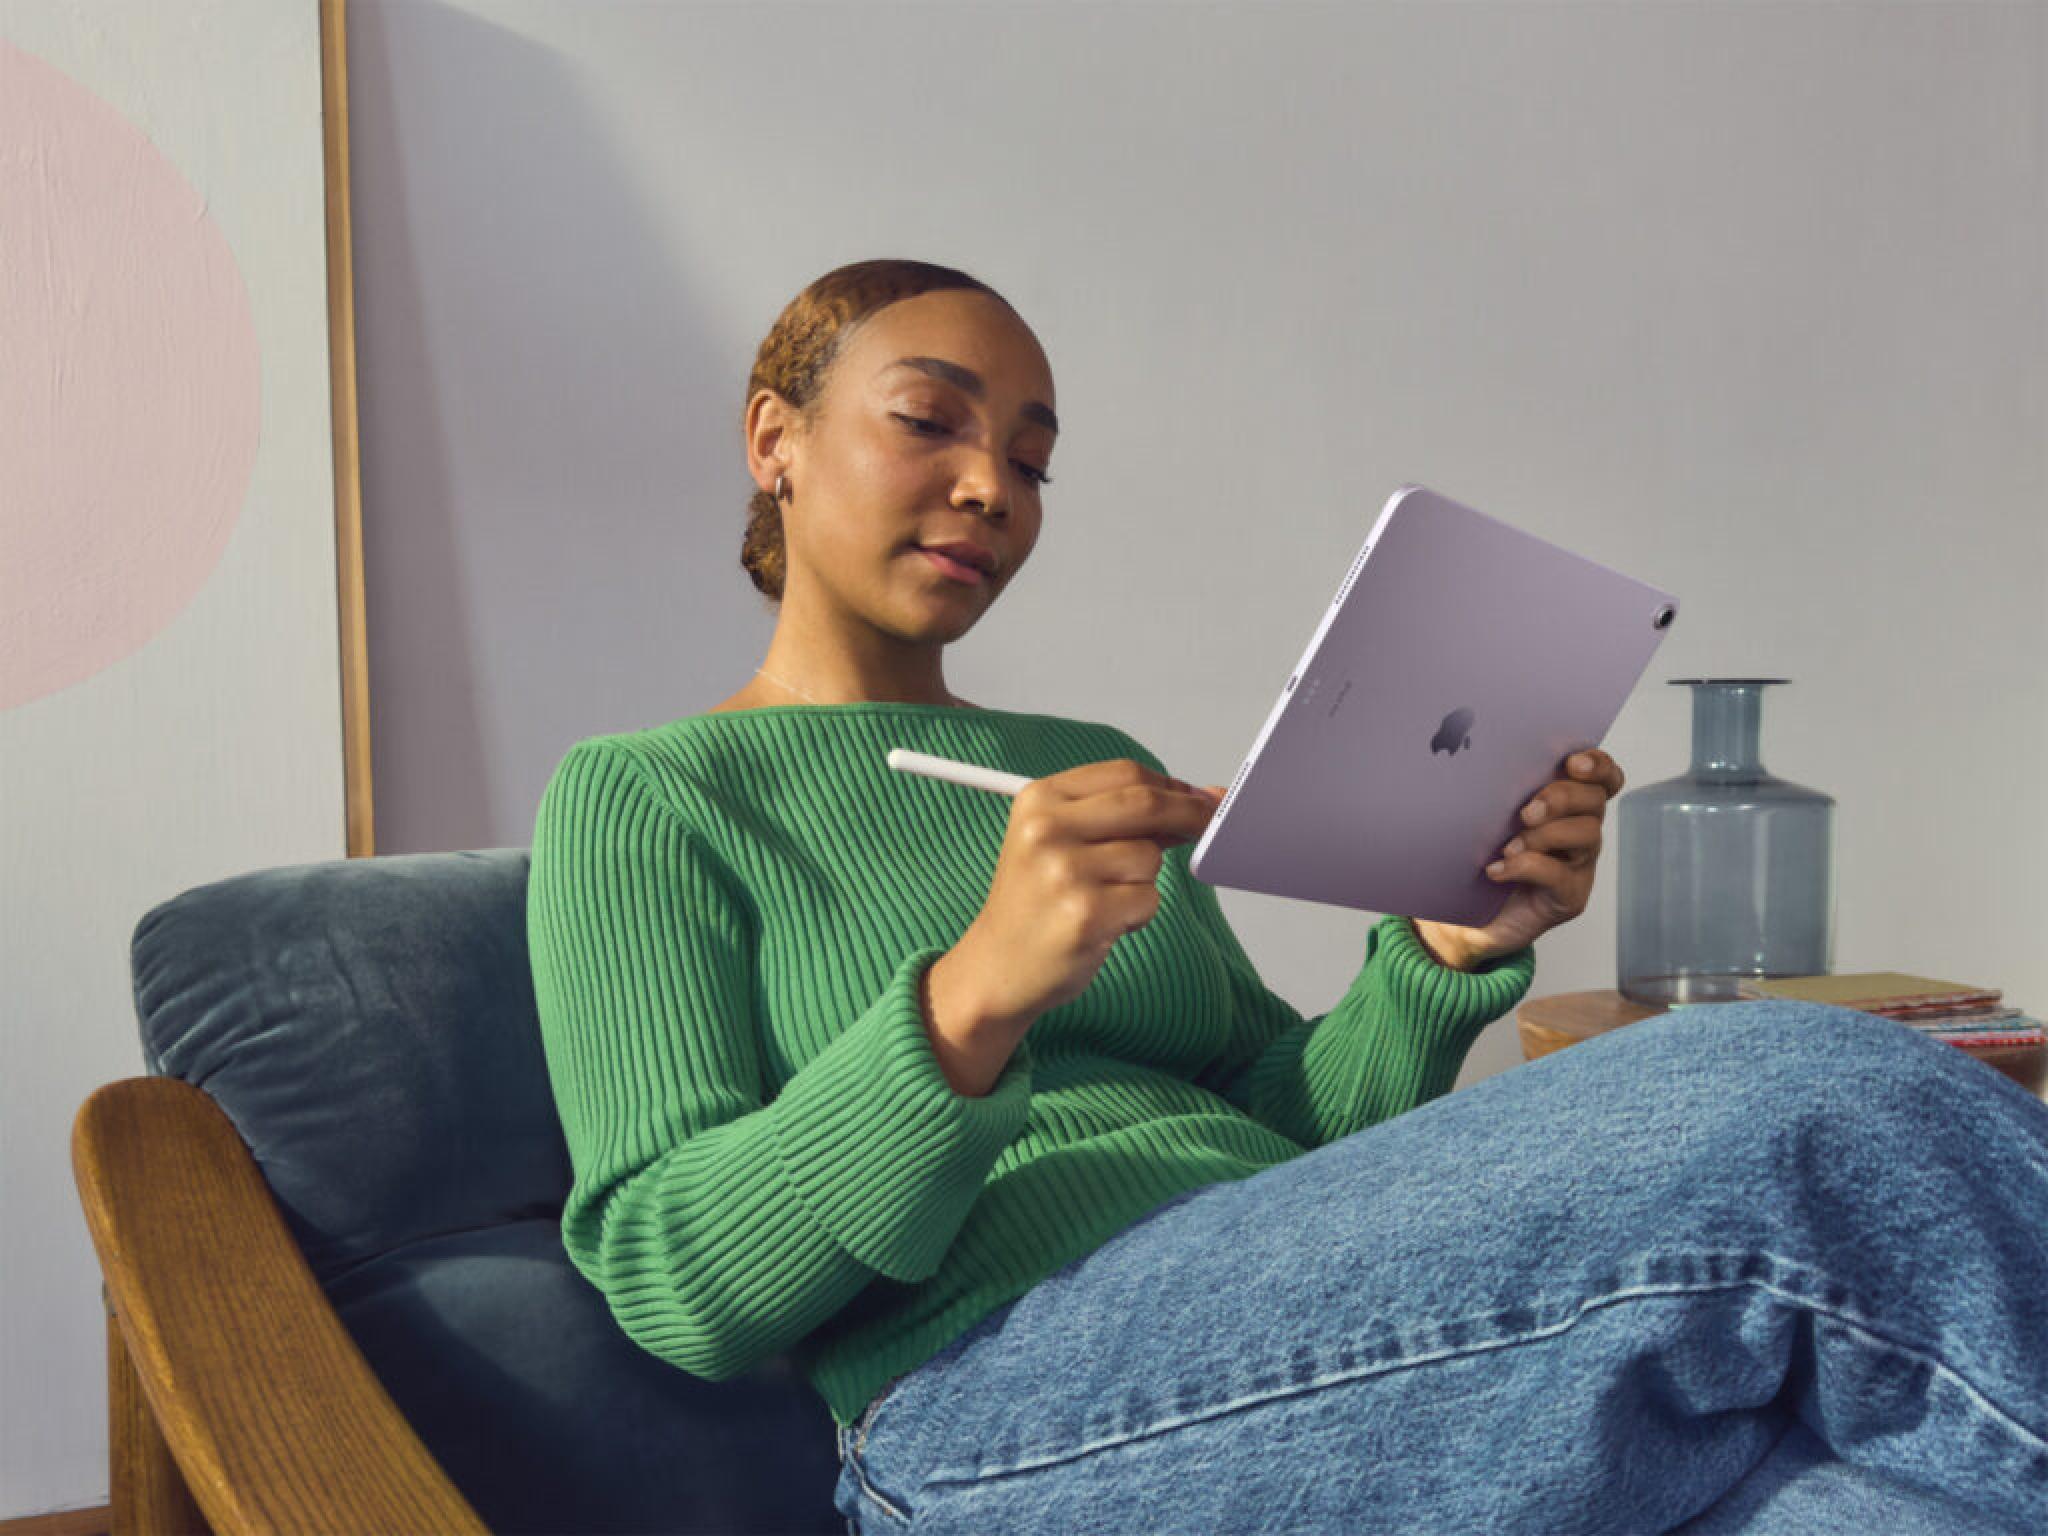  apple-launches-ipad-pro-with-m4-chip-oled-display-at-999-ipad-air-now-comes-in-two-sizes-for-the-first-time 